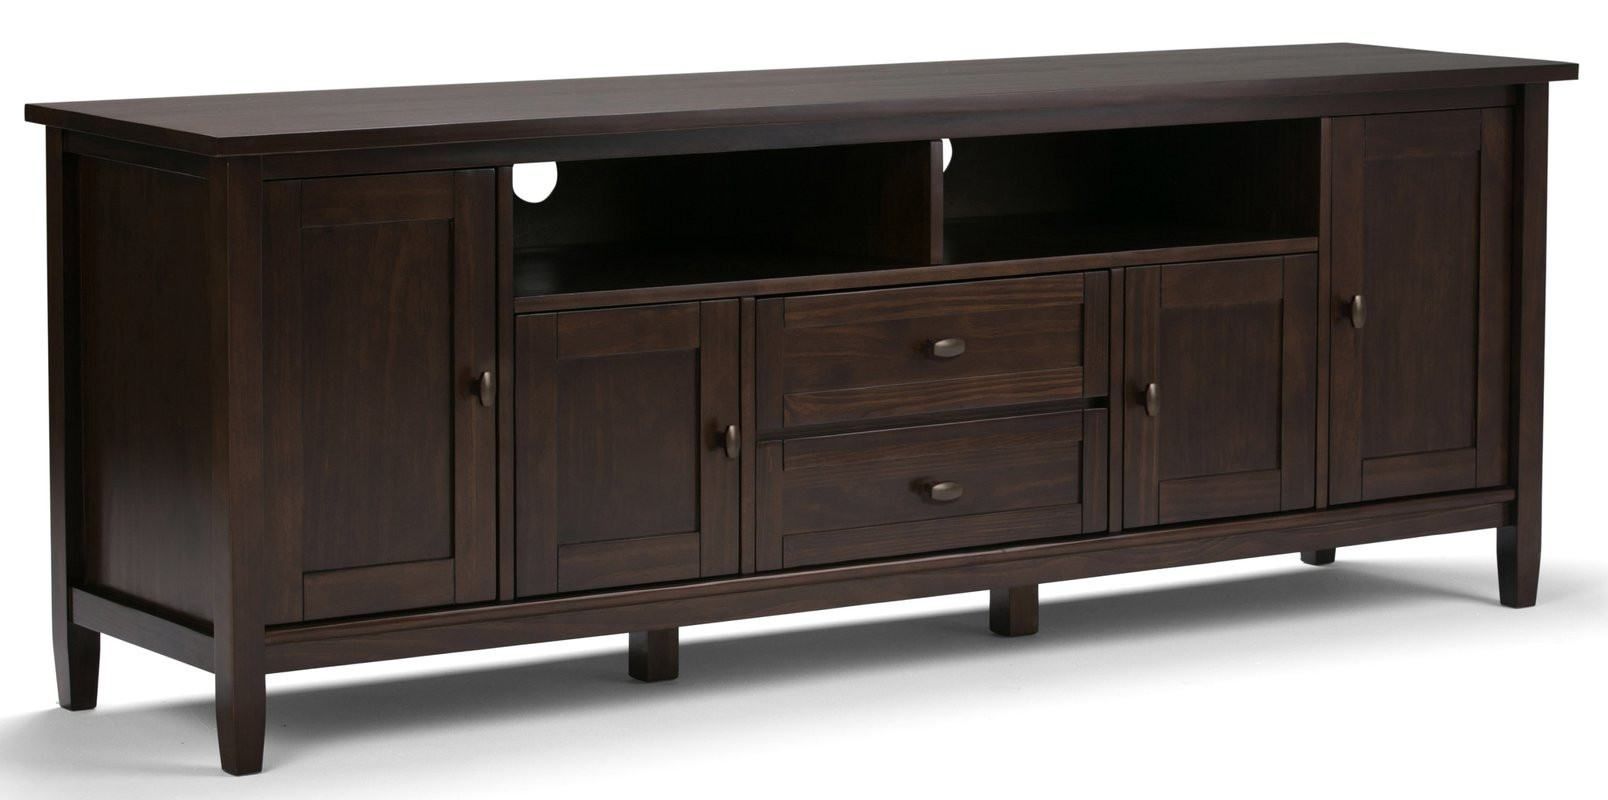 Ideal Tv Stands 72 Inch Home Ideas 72 Inch Tv Stand | Cakestandlady Pertaining To Walton 72 Inch Tv Stands (View 6 of 30)